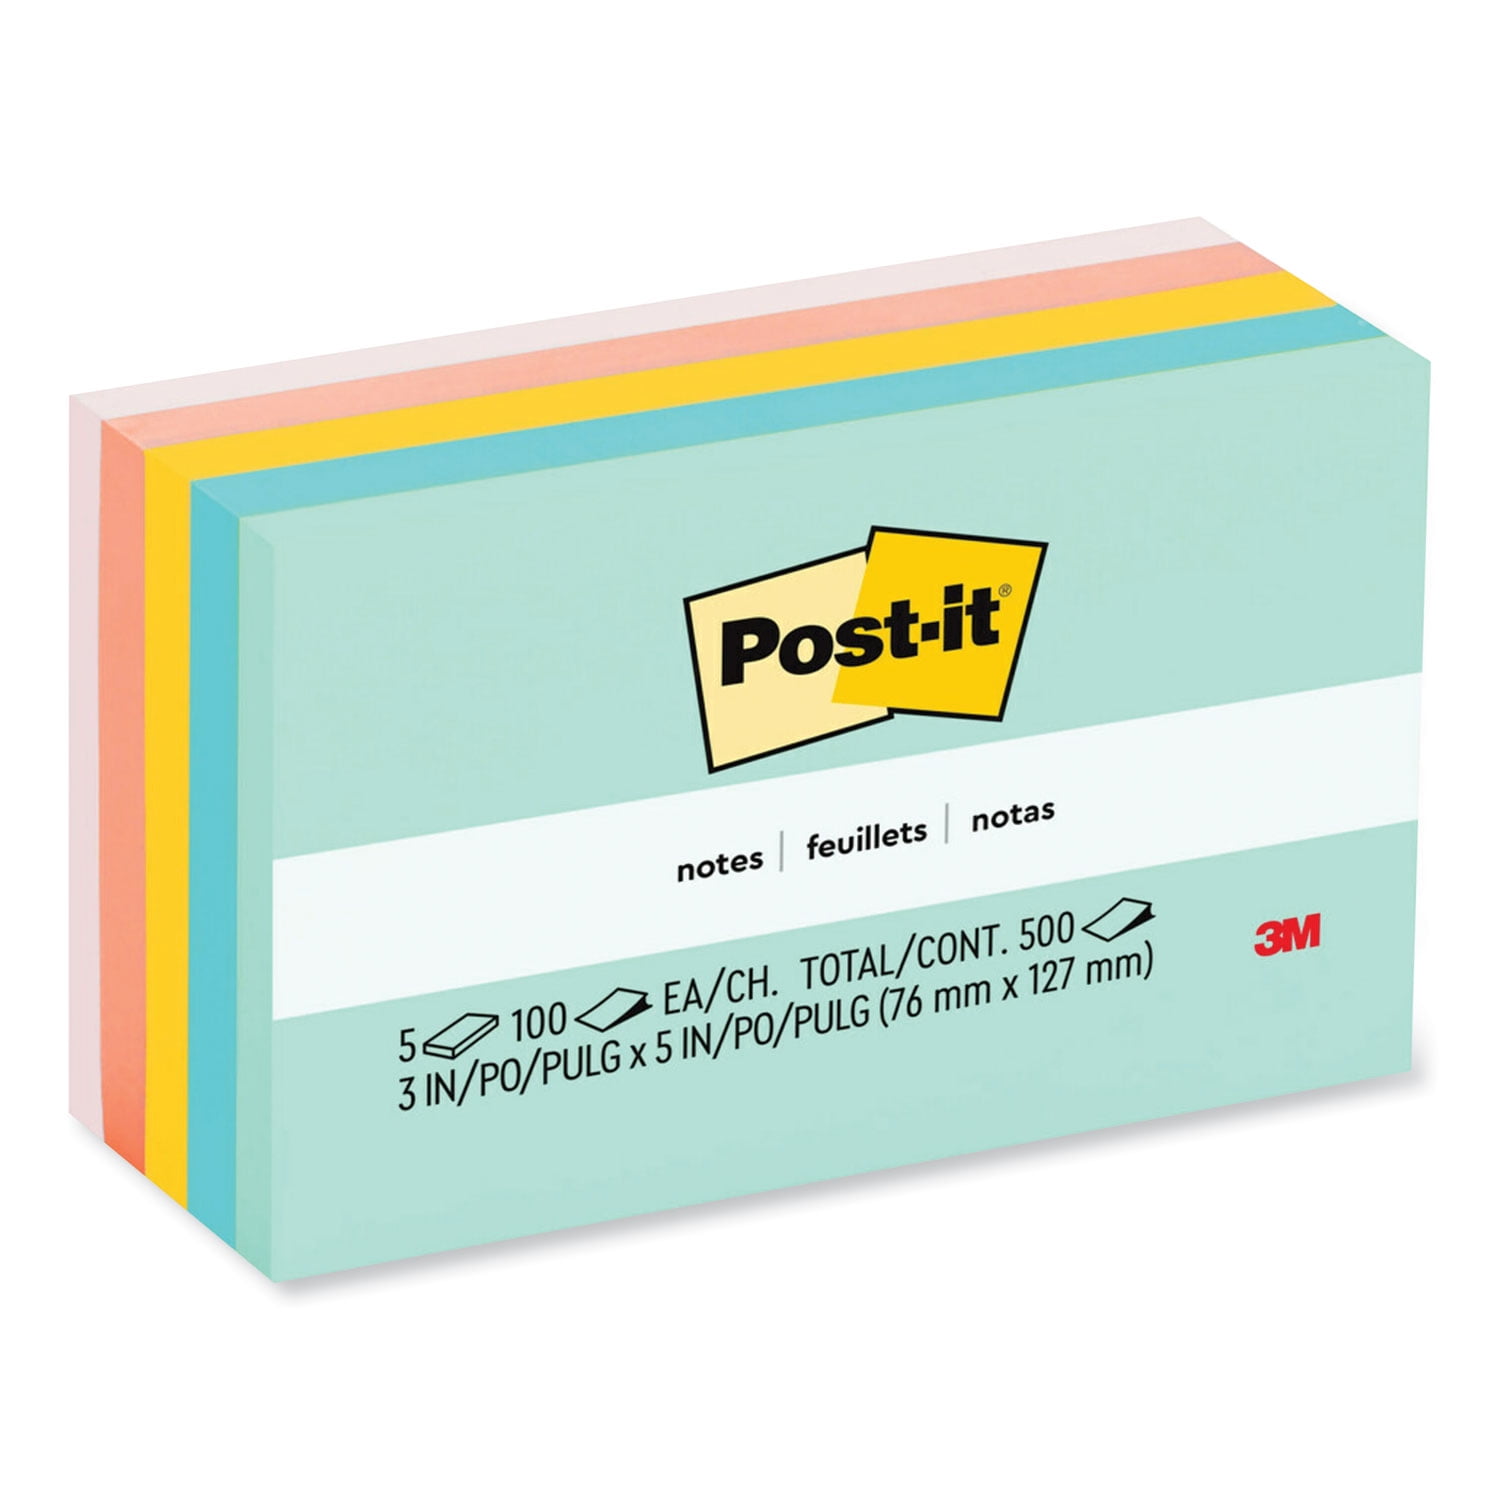  Post-it Super Sticky Notes Ultra Yellow Colour, Pack of 12  Pads, 90 Sheets per Pad, 76 mm x 127 mm - Extra Sticky Notes for Note  Taking, to Do Lists